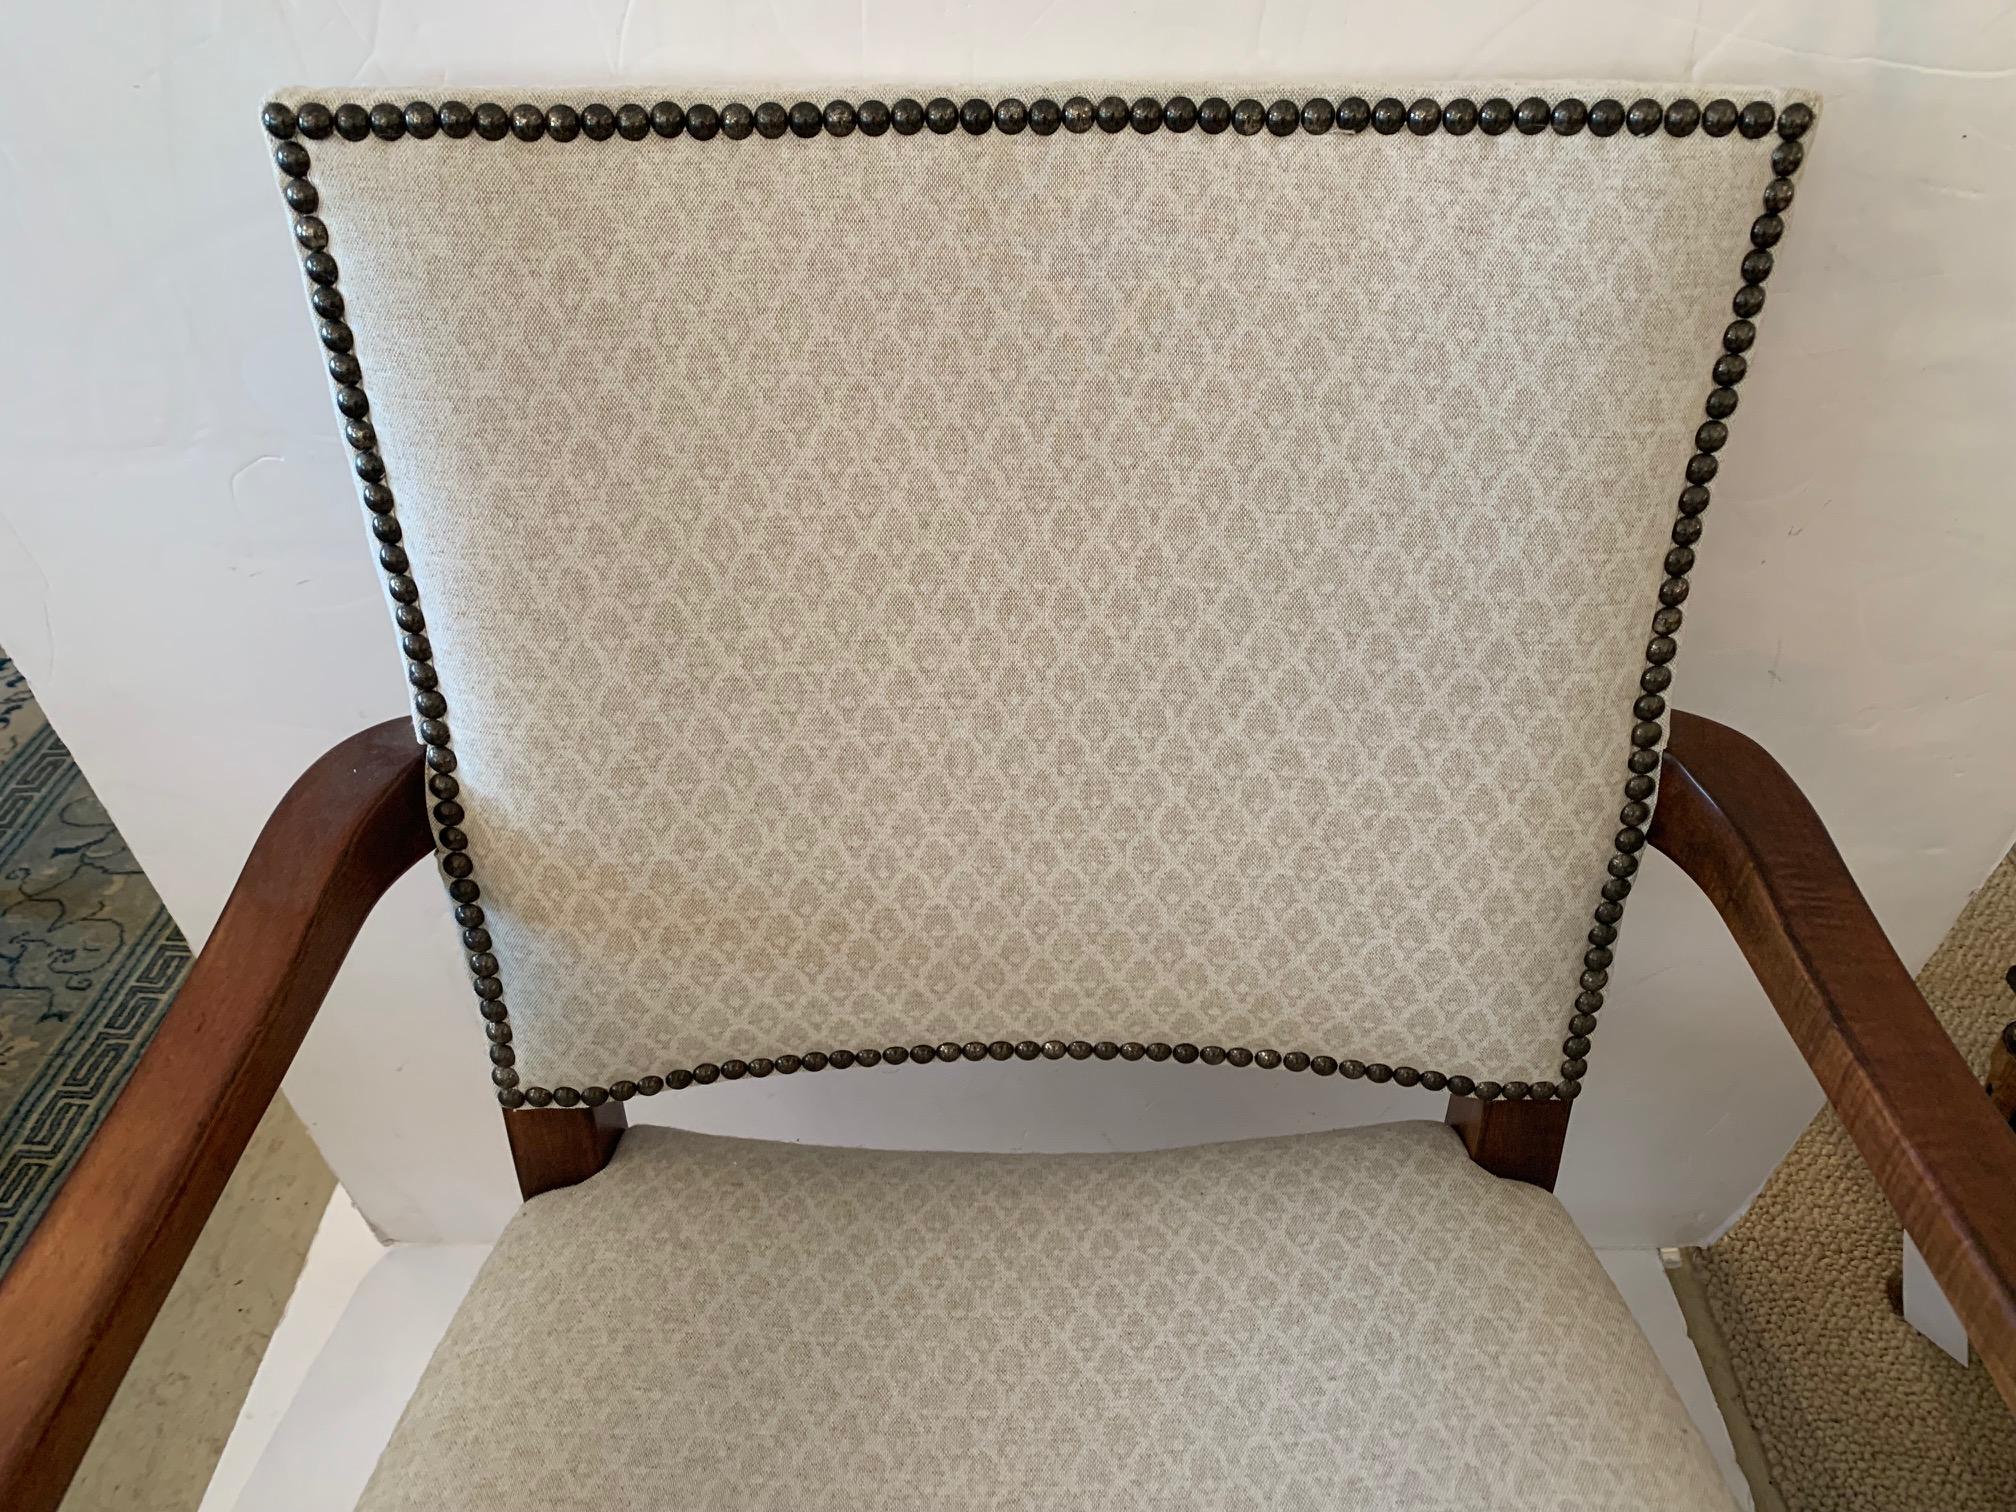 A handsome walnut and upholstered armchair, perfect for a desk or extra transitional chair, having cream upholstery finished with antiqued brass nailheads.